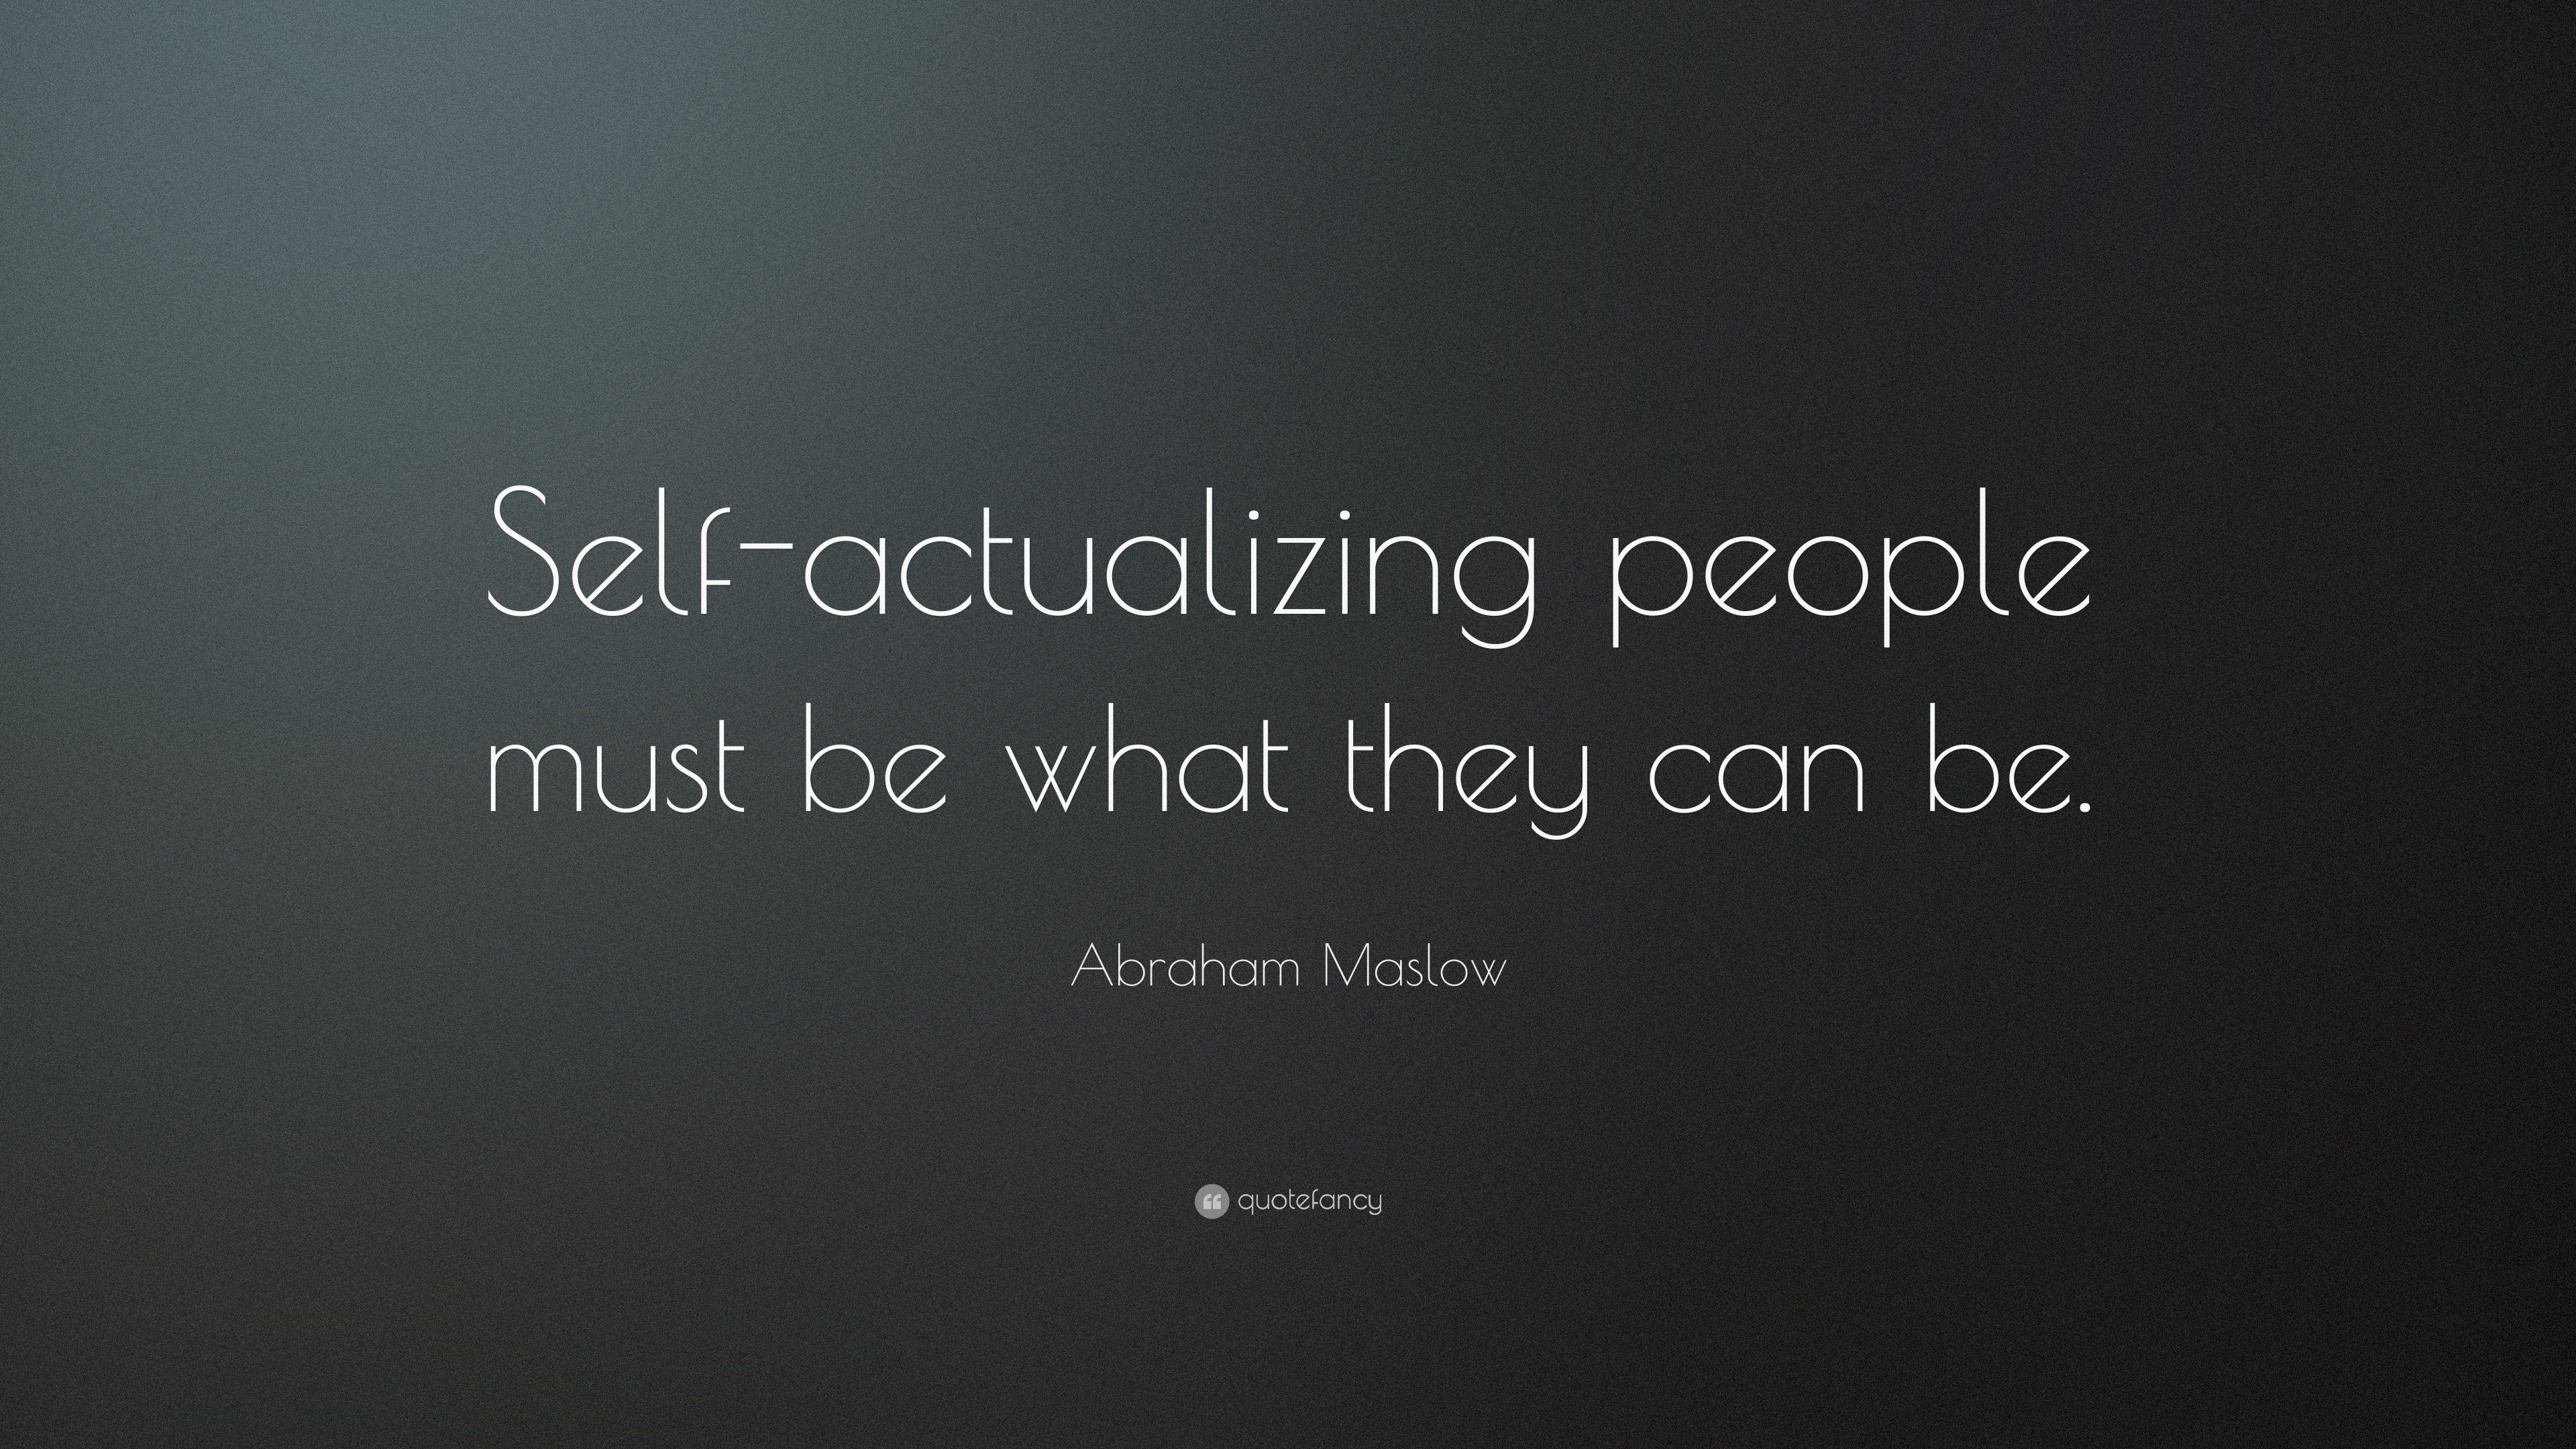 Abraham Maslow Quote: “Self-actualizing people must be what they can be.”